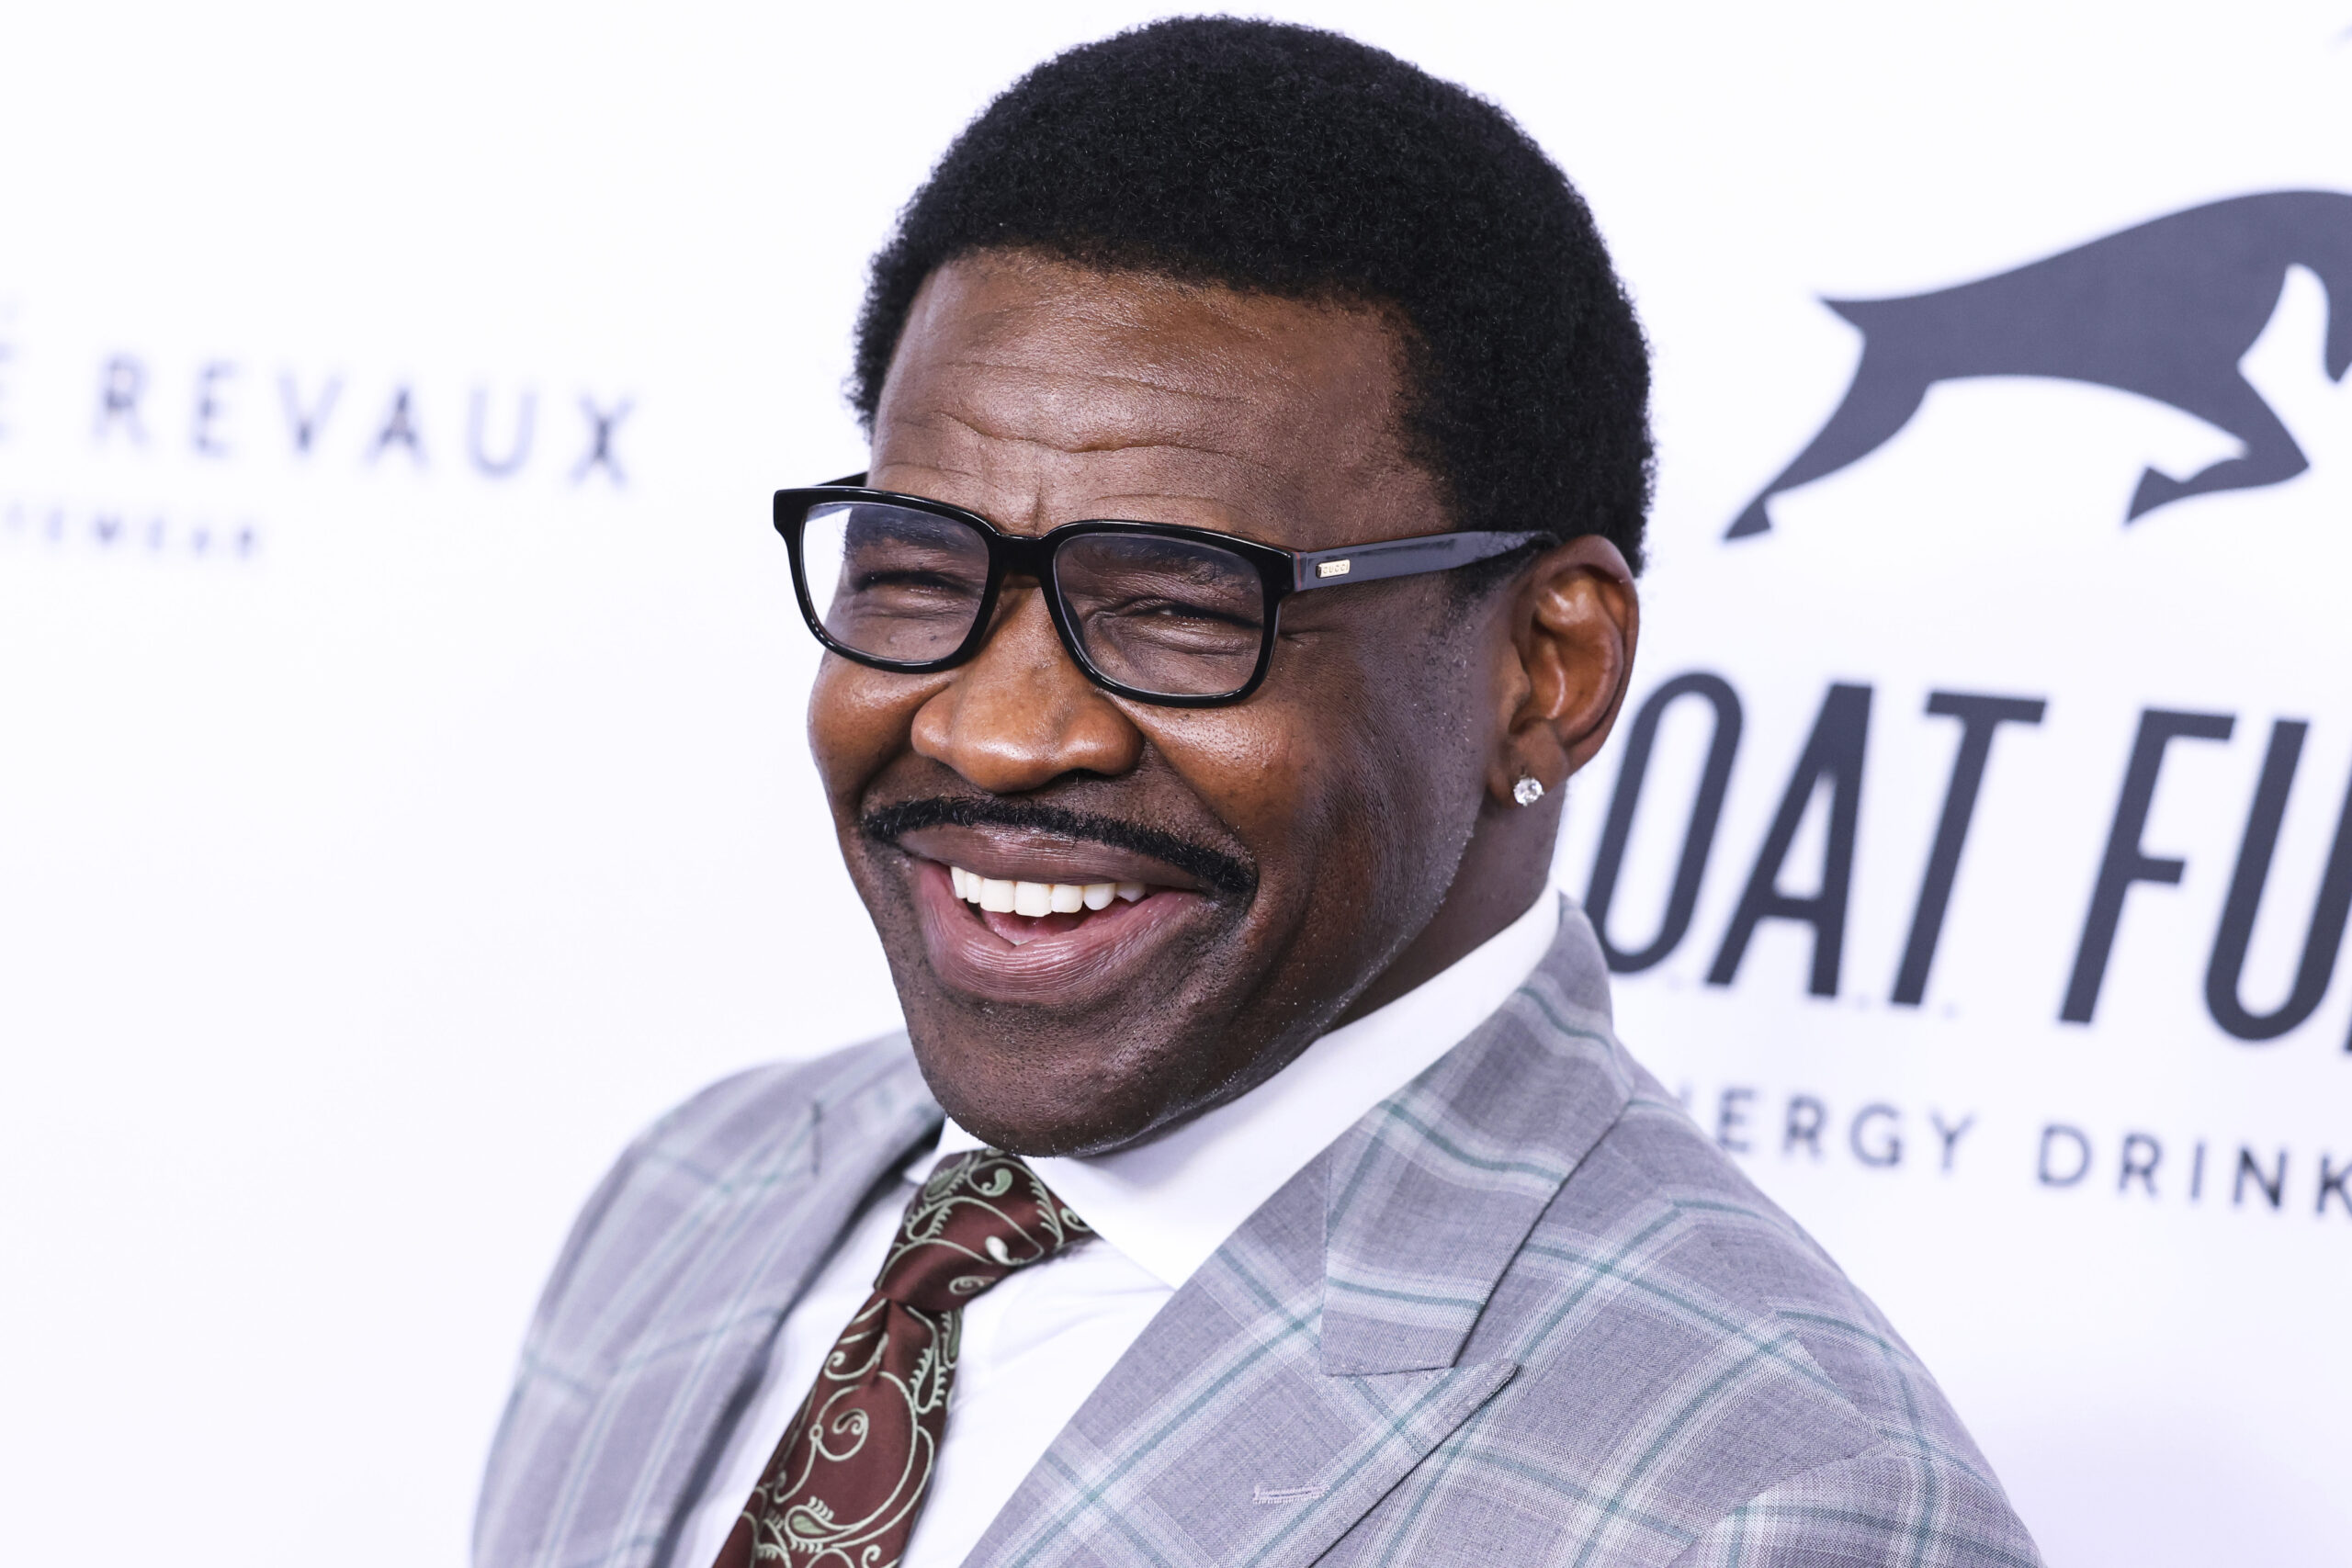 Michael Irvin Pulled From Super Bowl Week Appearances By NFL Network After A Woman’s Complaint